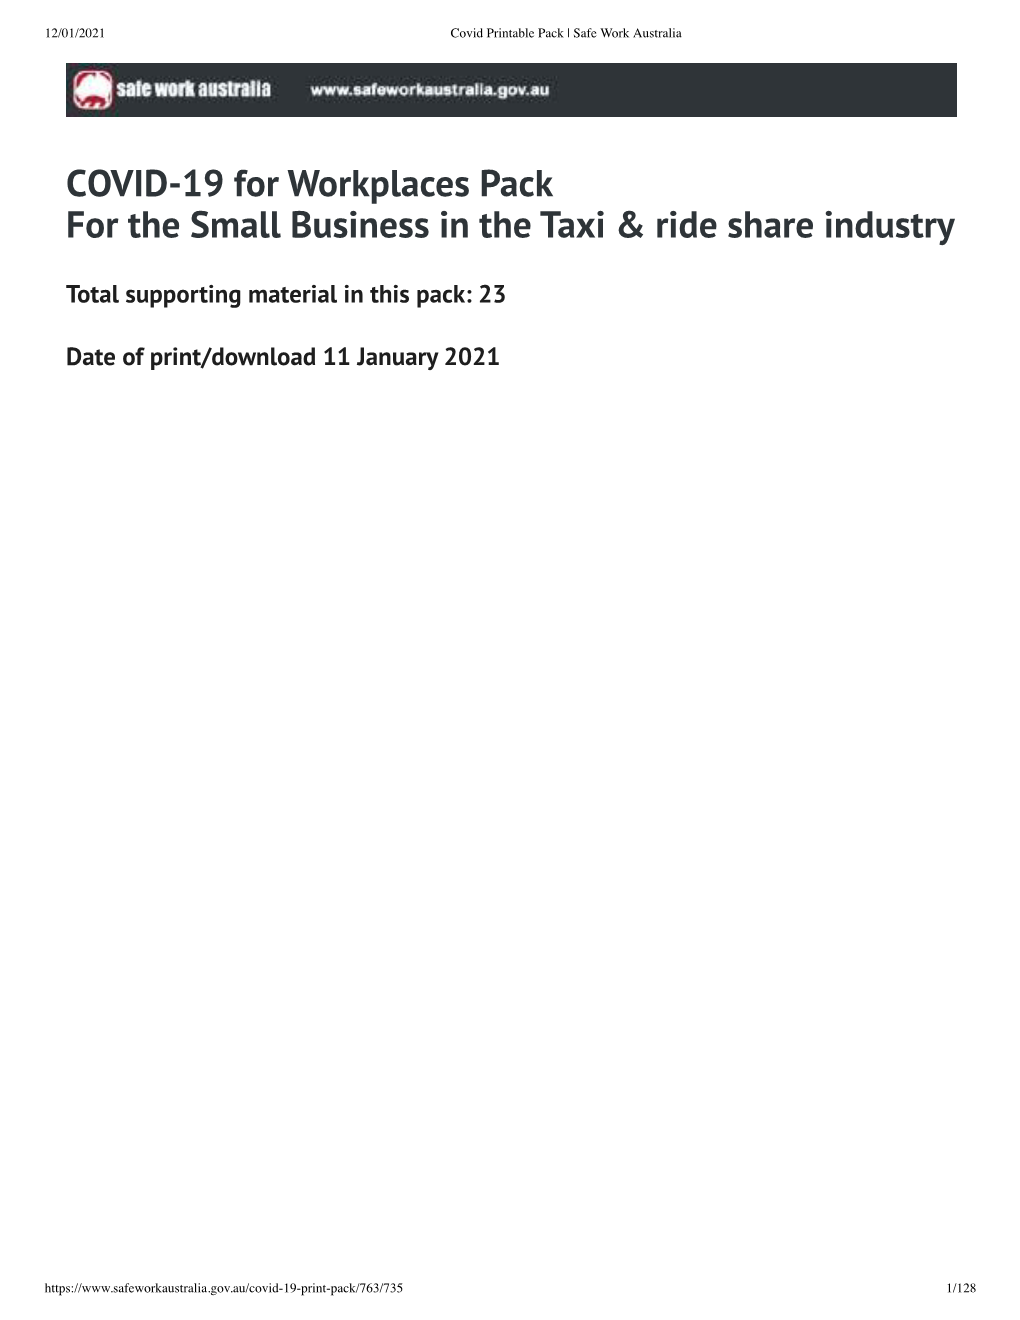 COVID-19 for Workplaces Pack for the Small Business in the Taxi & Ride Share Industry